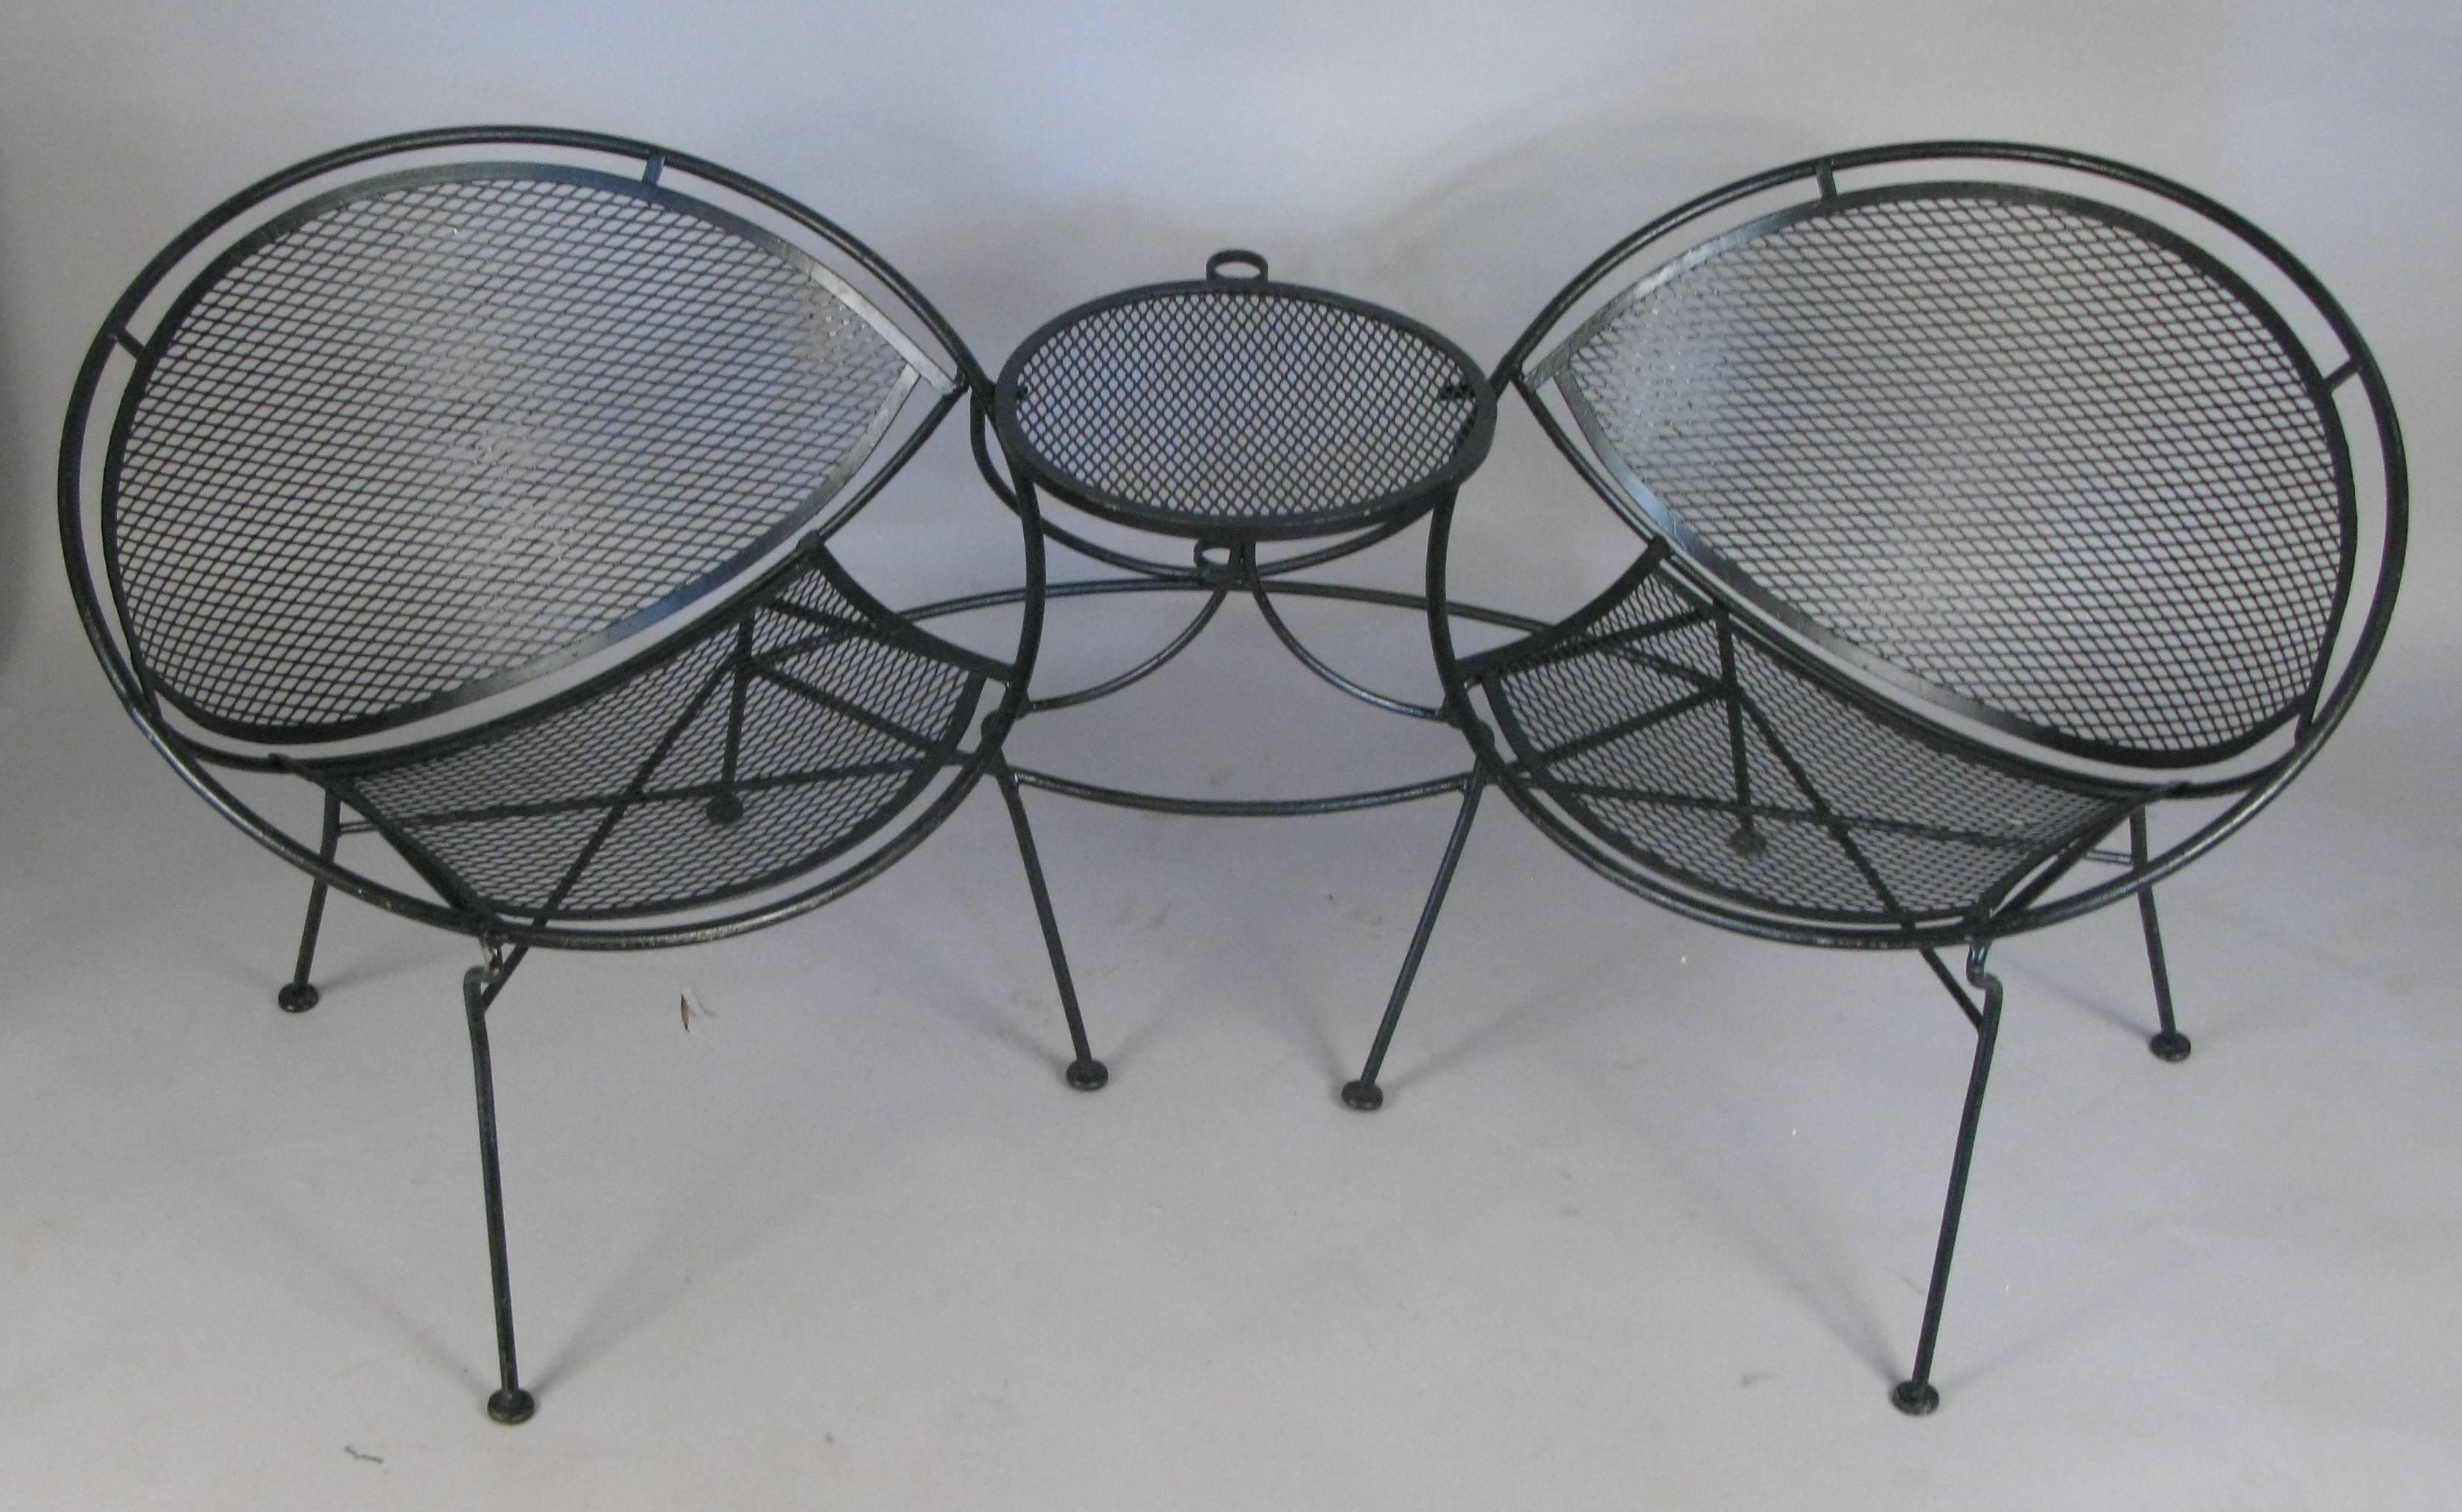 A fantstic wrought iron 'tête-à-tête' settee lounge from Salterini's Radar collection, designed by Maurizio Tempestini, circa 1950. Very comfortable and stylish, the two lounge chairs are connected by a table between, which also incorporates an